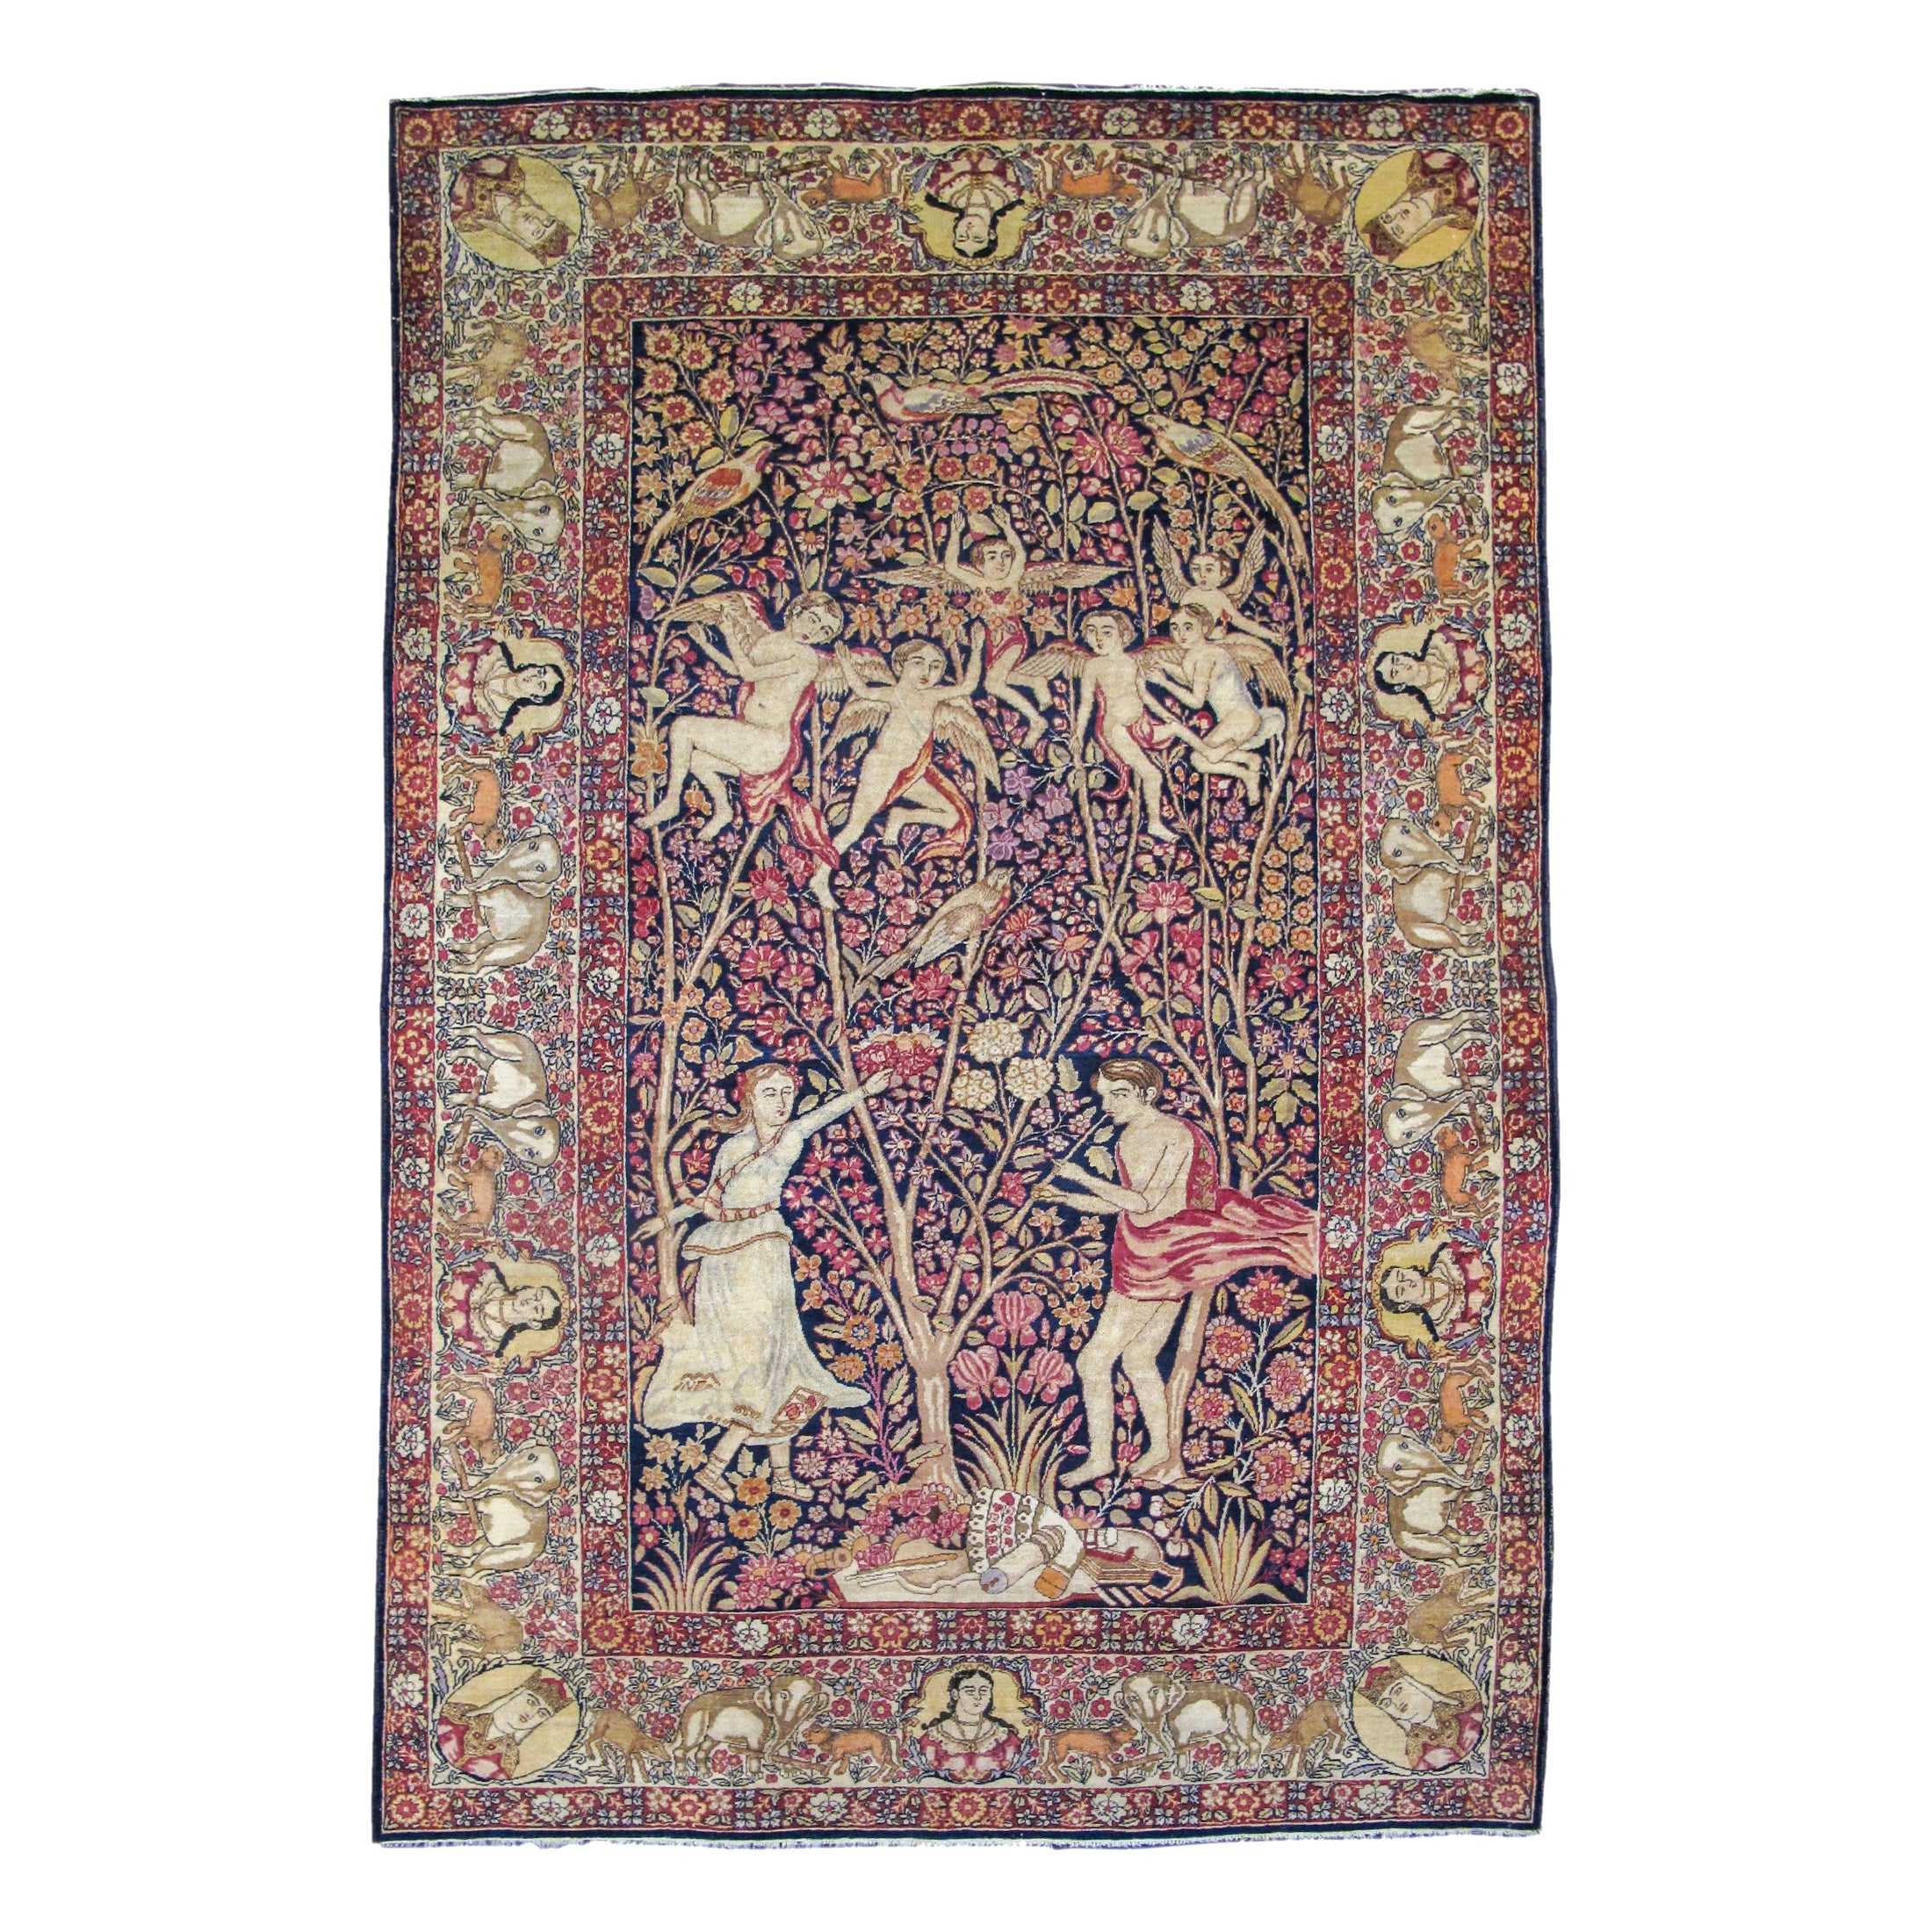 Antique Persian Kirman Pictorial Rug, 19th Century For Sale